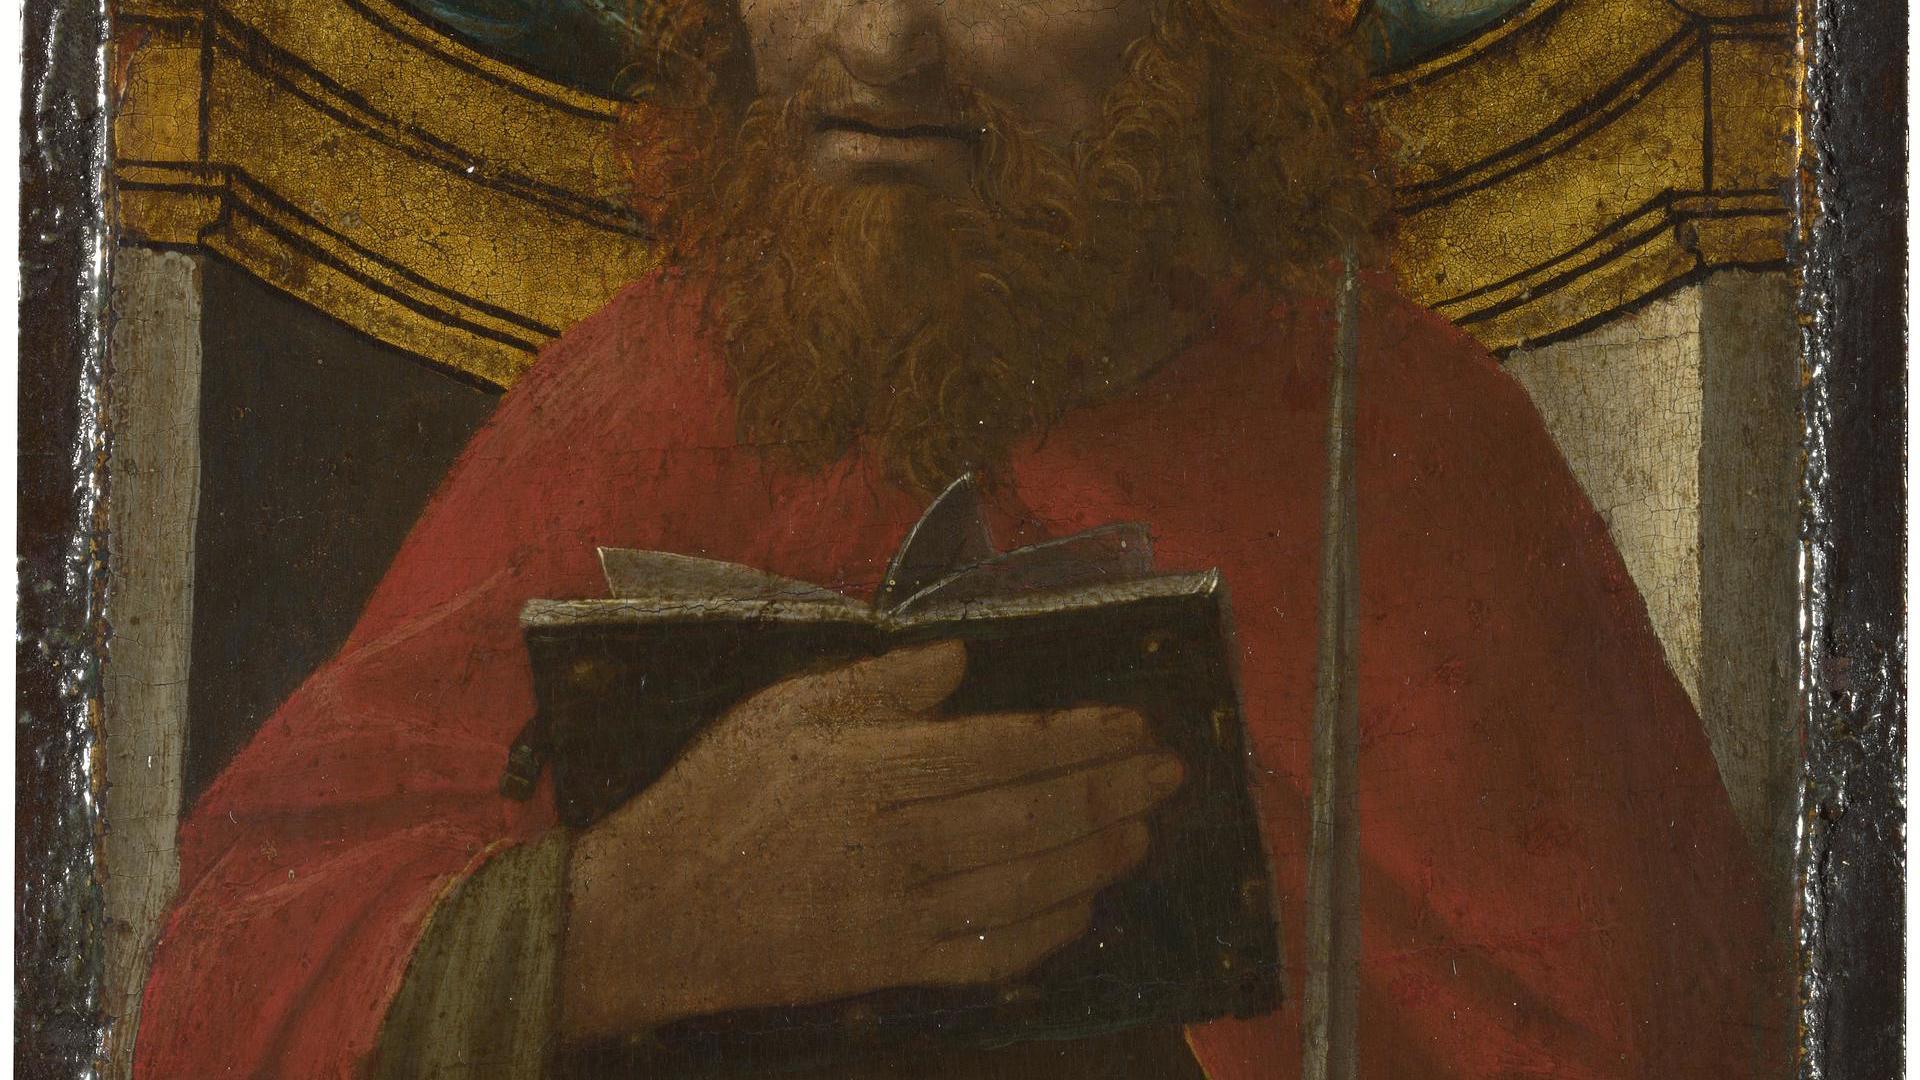 Saint Paul by Master of the Pala Sforzesca